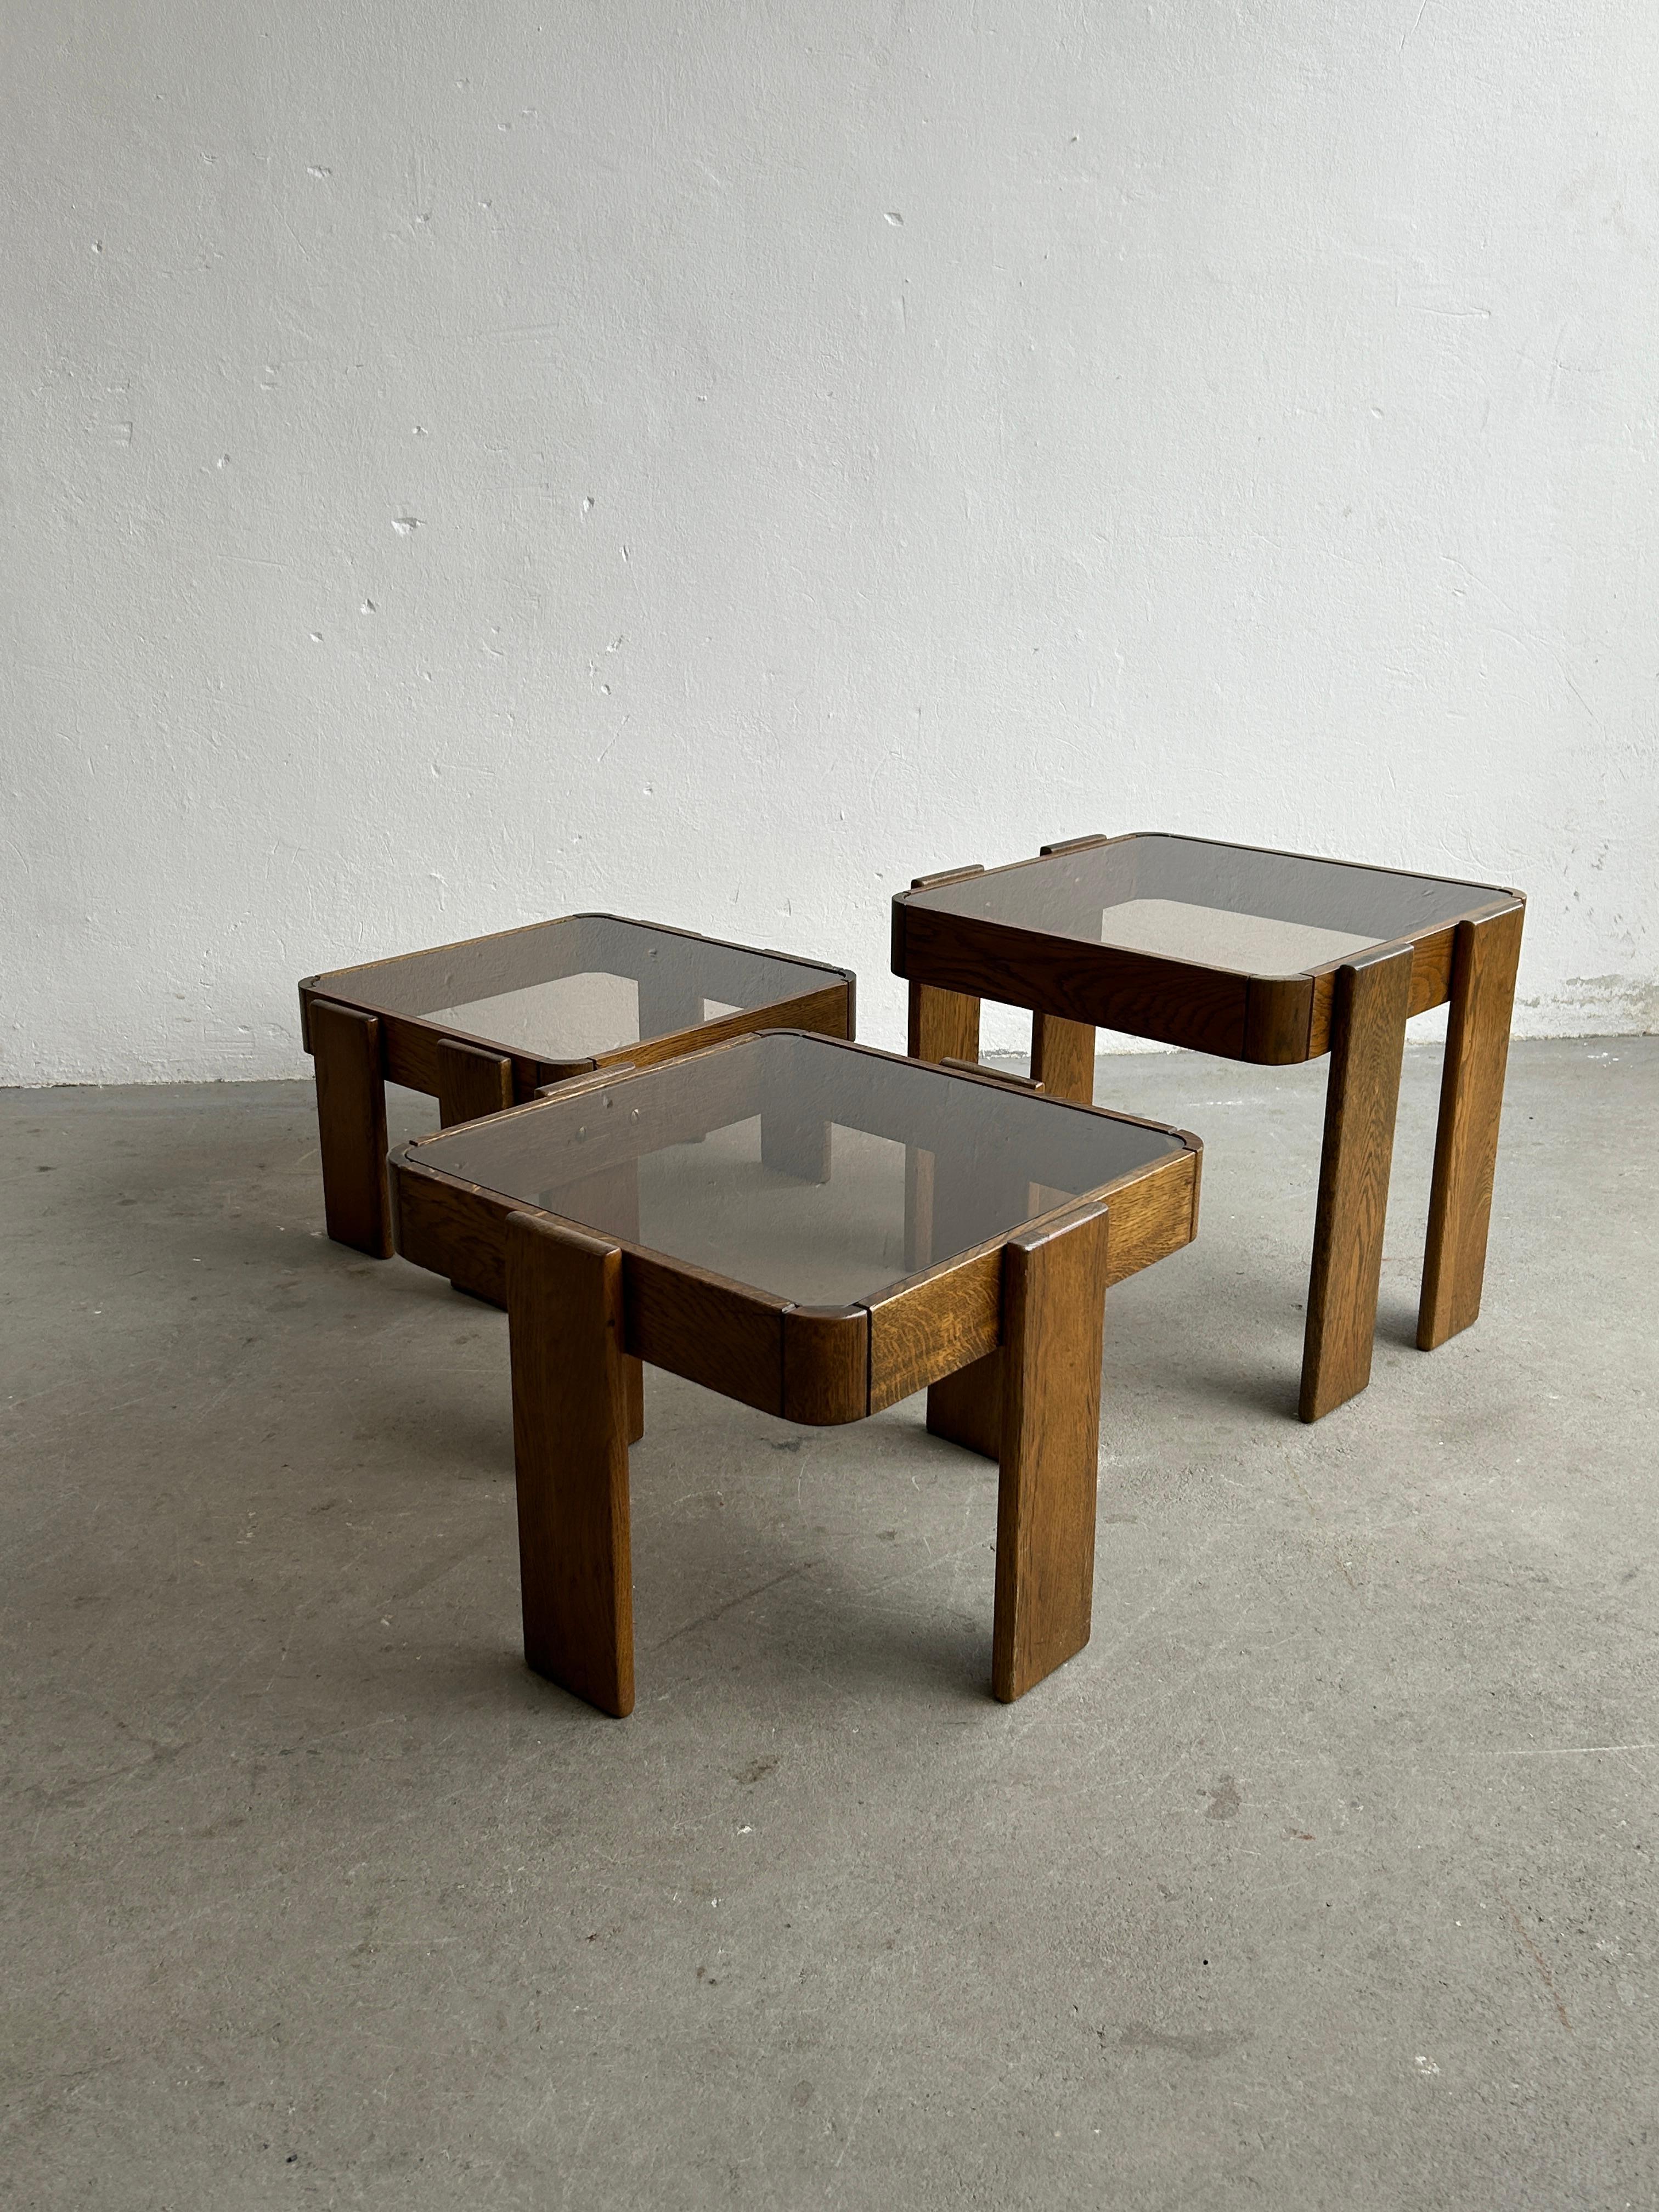 Set of three stacking tables designed by Gianfranco Frattini, for Cassina in the 1970s.
A vintage Yugoslavian production from the late 1970s or early 1980s.

Overall, the table is in very good vintage condition with no significant damages.